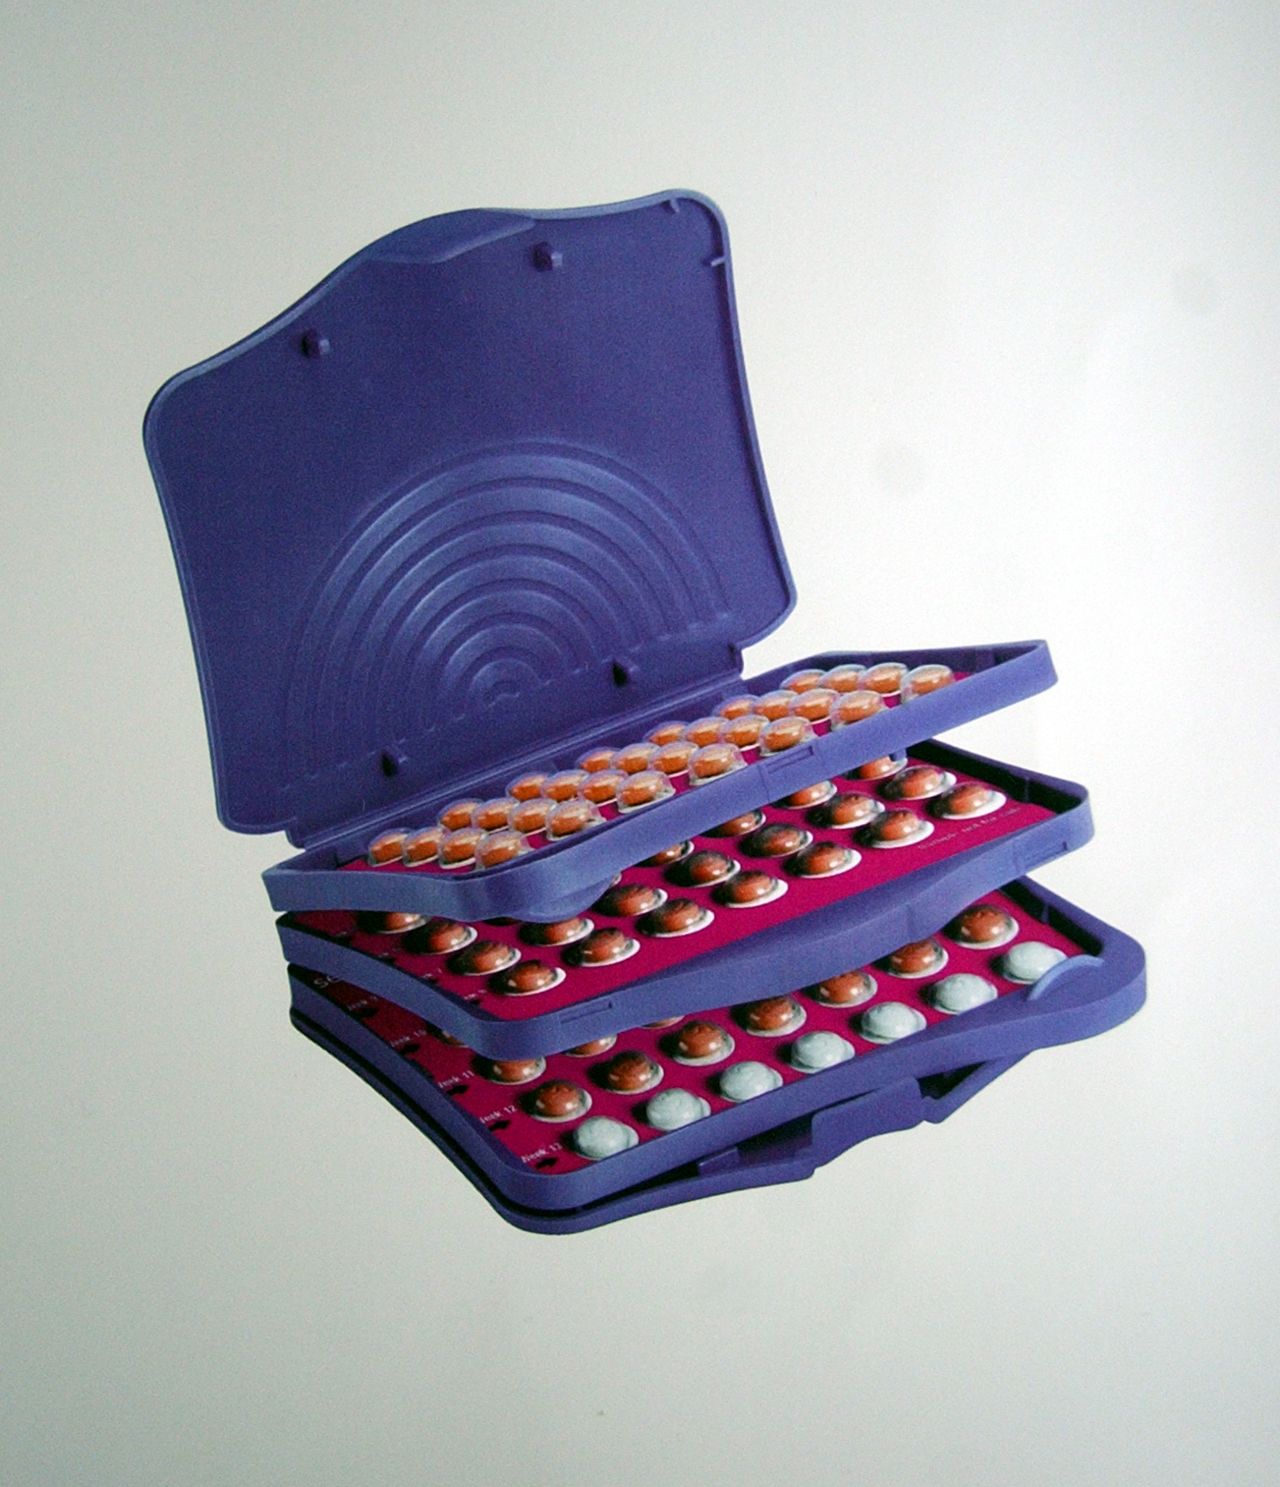 Birth control packages traditionally supply hormone pills for 21 days and placebo pills for seven, bringing a period once a month. But in 2003, the FDA approved Seasonale, a new kind of birth control that enabled women to have full periods only four times a year. In 2007, the FDA approved Lybrel, the first oral contraceptive designed to stop a woman's period indefinitely. With these drugs on the market, women now have more choices when it comes to when -- or if -- they have a monthly cycle.